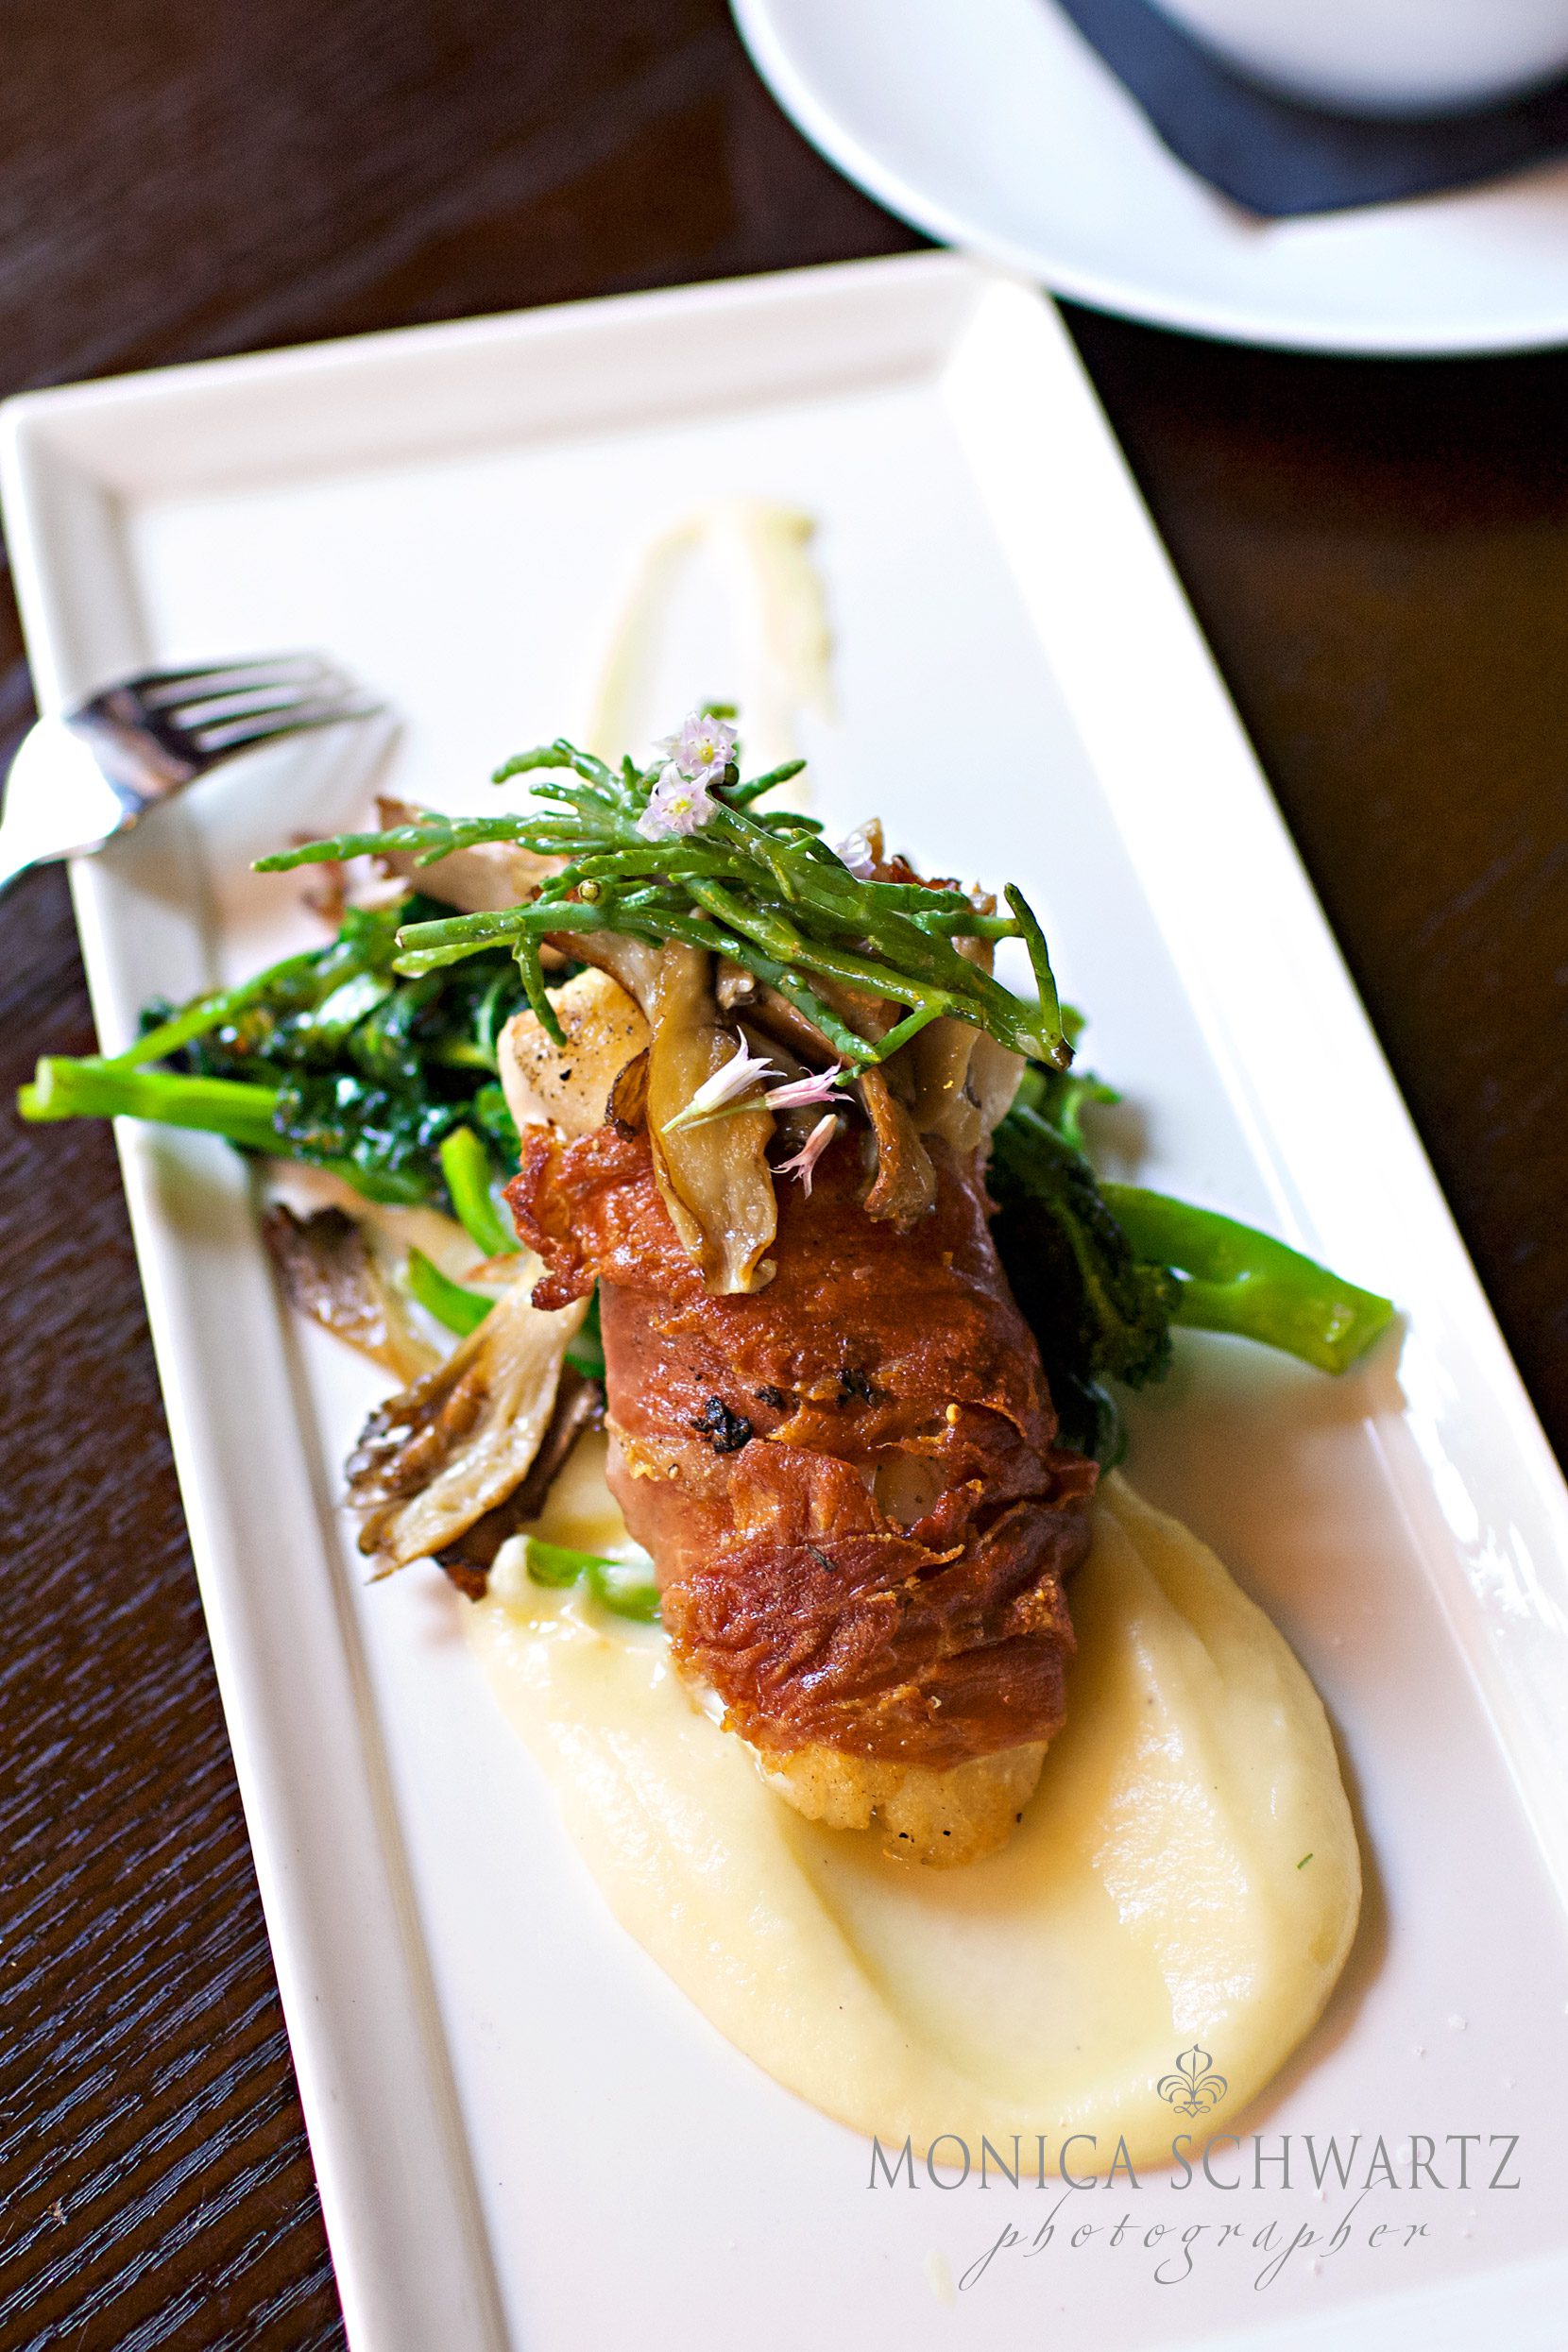 Prosciutto-wrapped-Cod-fillet-with-parsnip-puree-broccolini-and-trumpet-mushrooms-at-Basil-Restaurant-in-Carmel-by-the-Sea-California